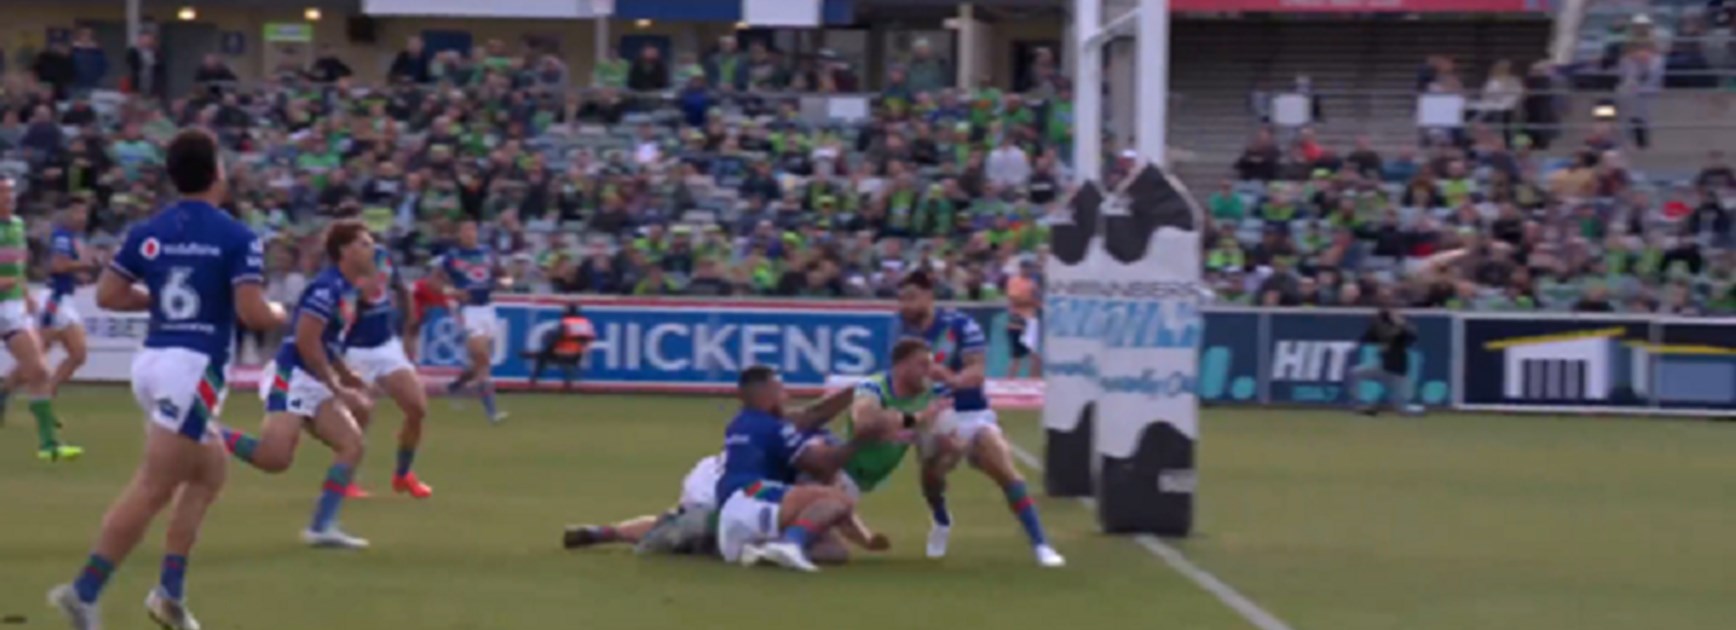 AFB and Aitken try saver short listed for top tackle